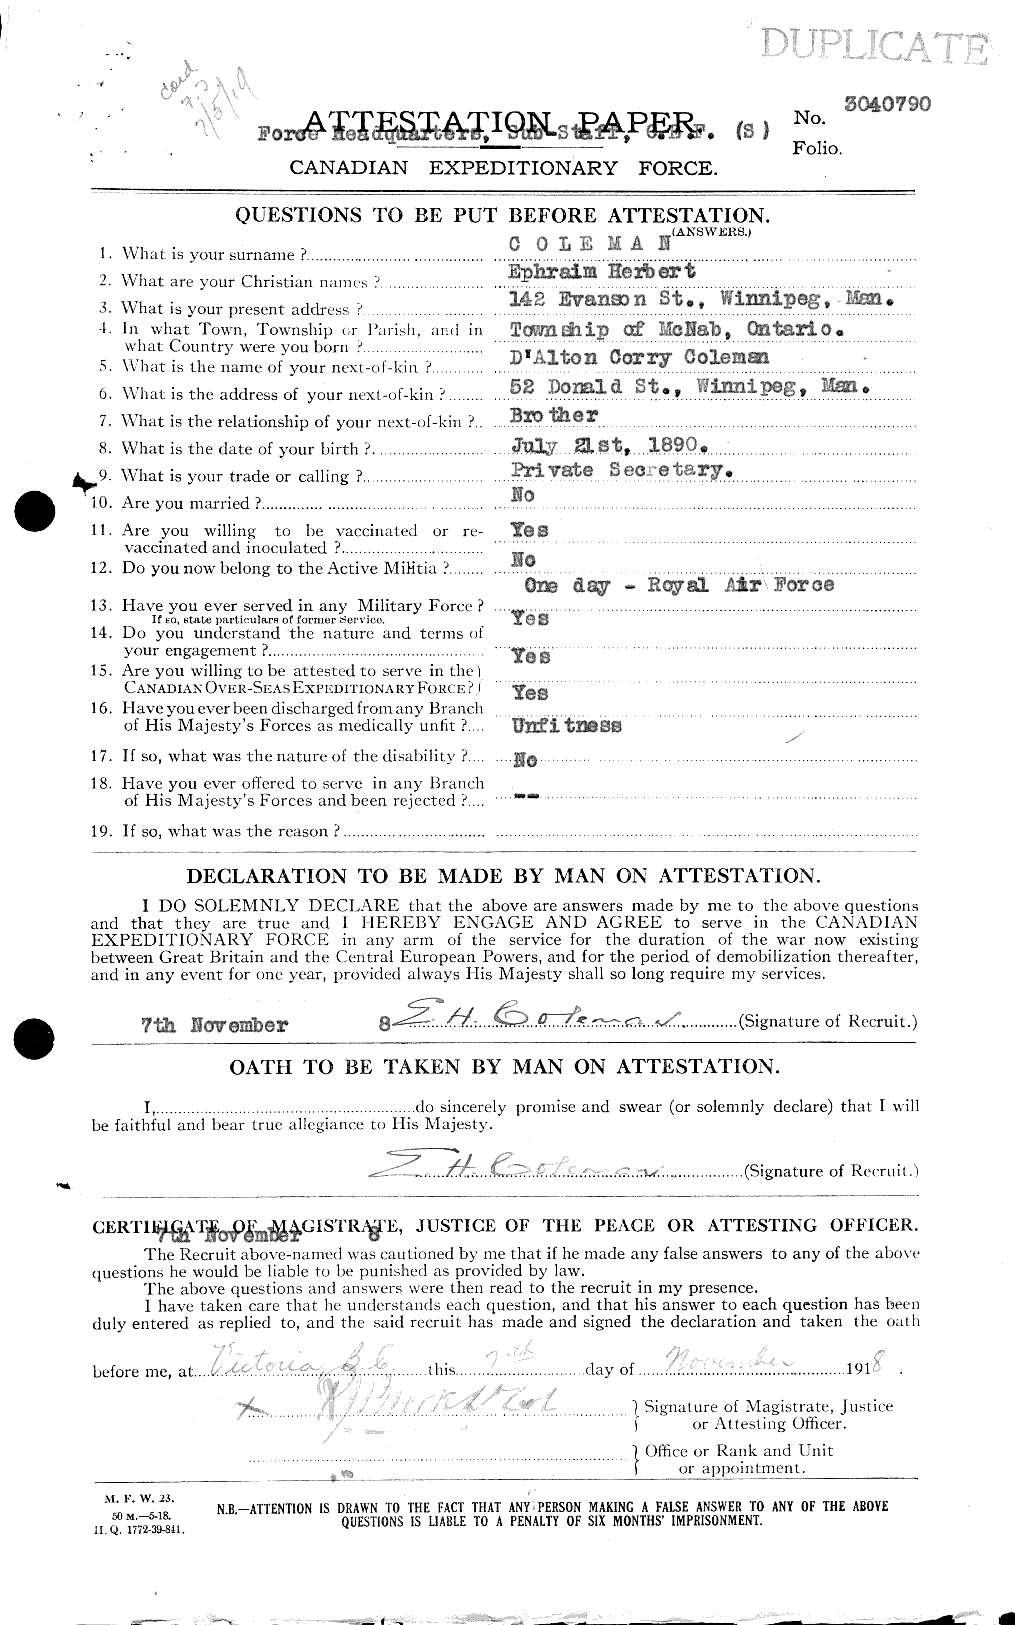 Personnel Records of the First World War - CEF 028115a